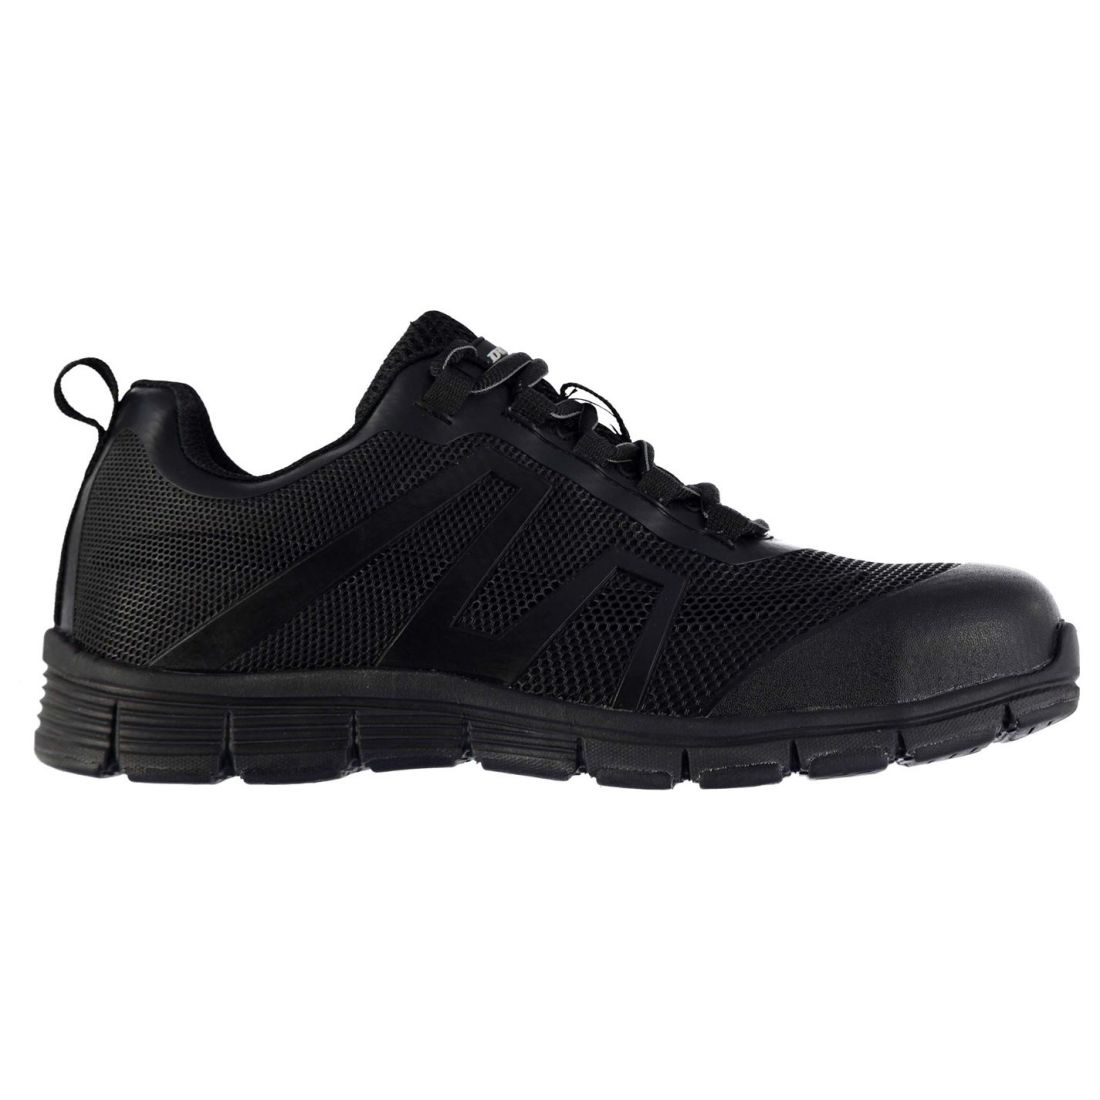 Dunlop Mens Safe MaineSB Safety Shoes Lace Up Steel Toe Cap Work ...